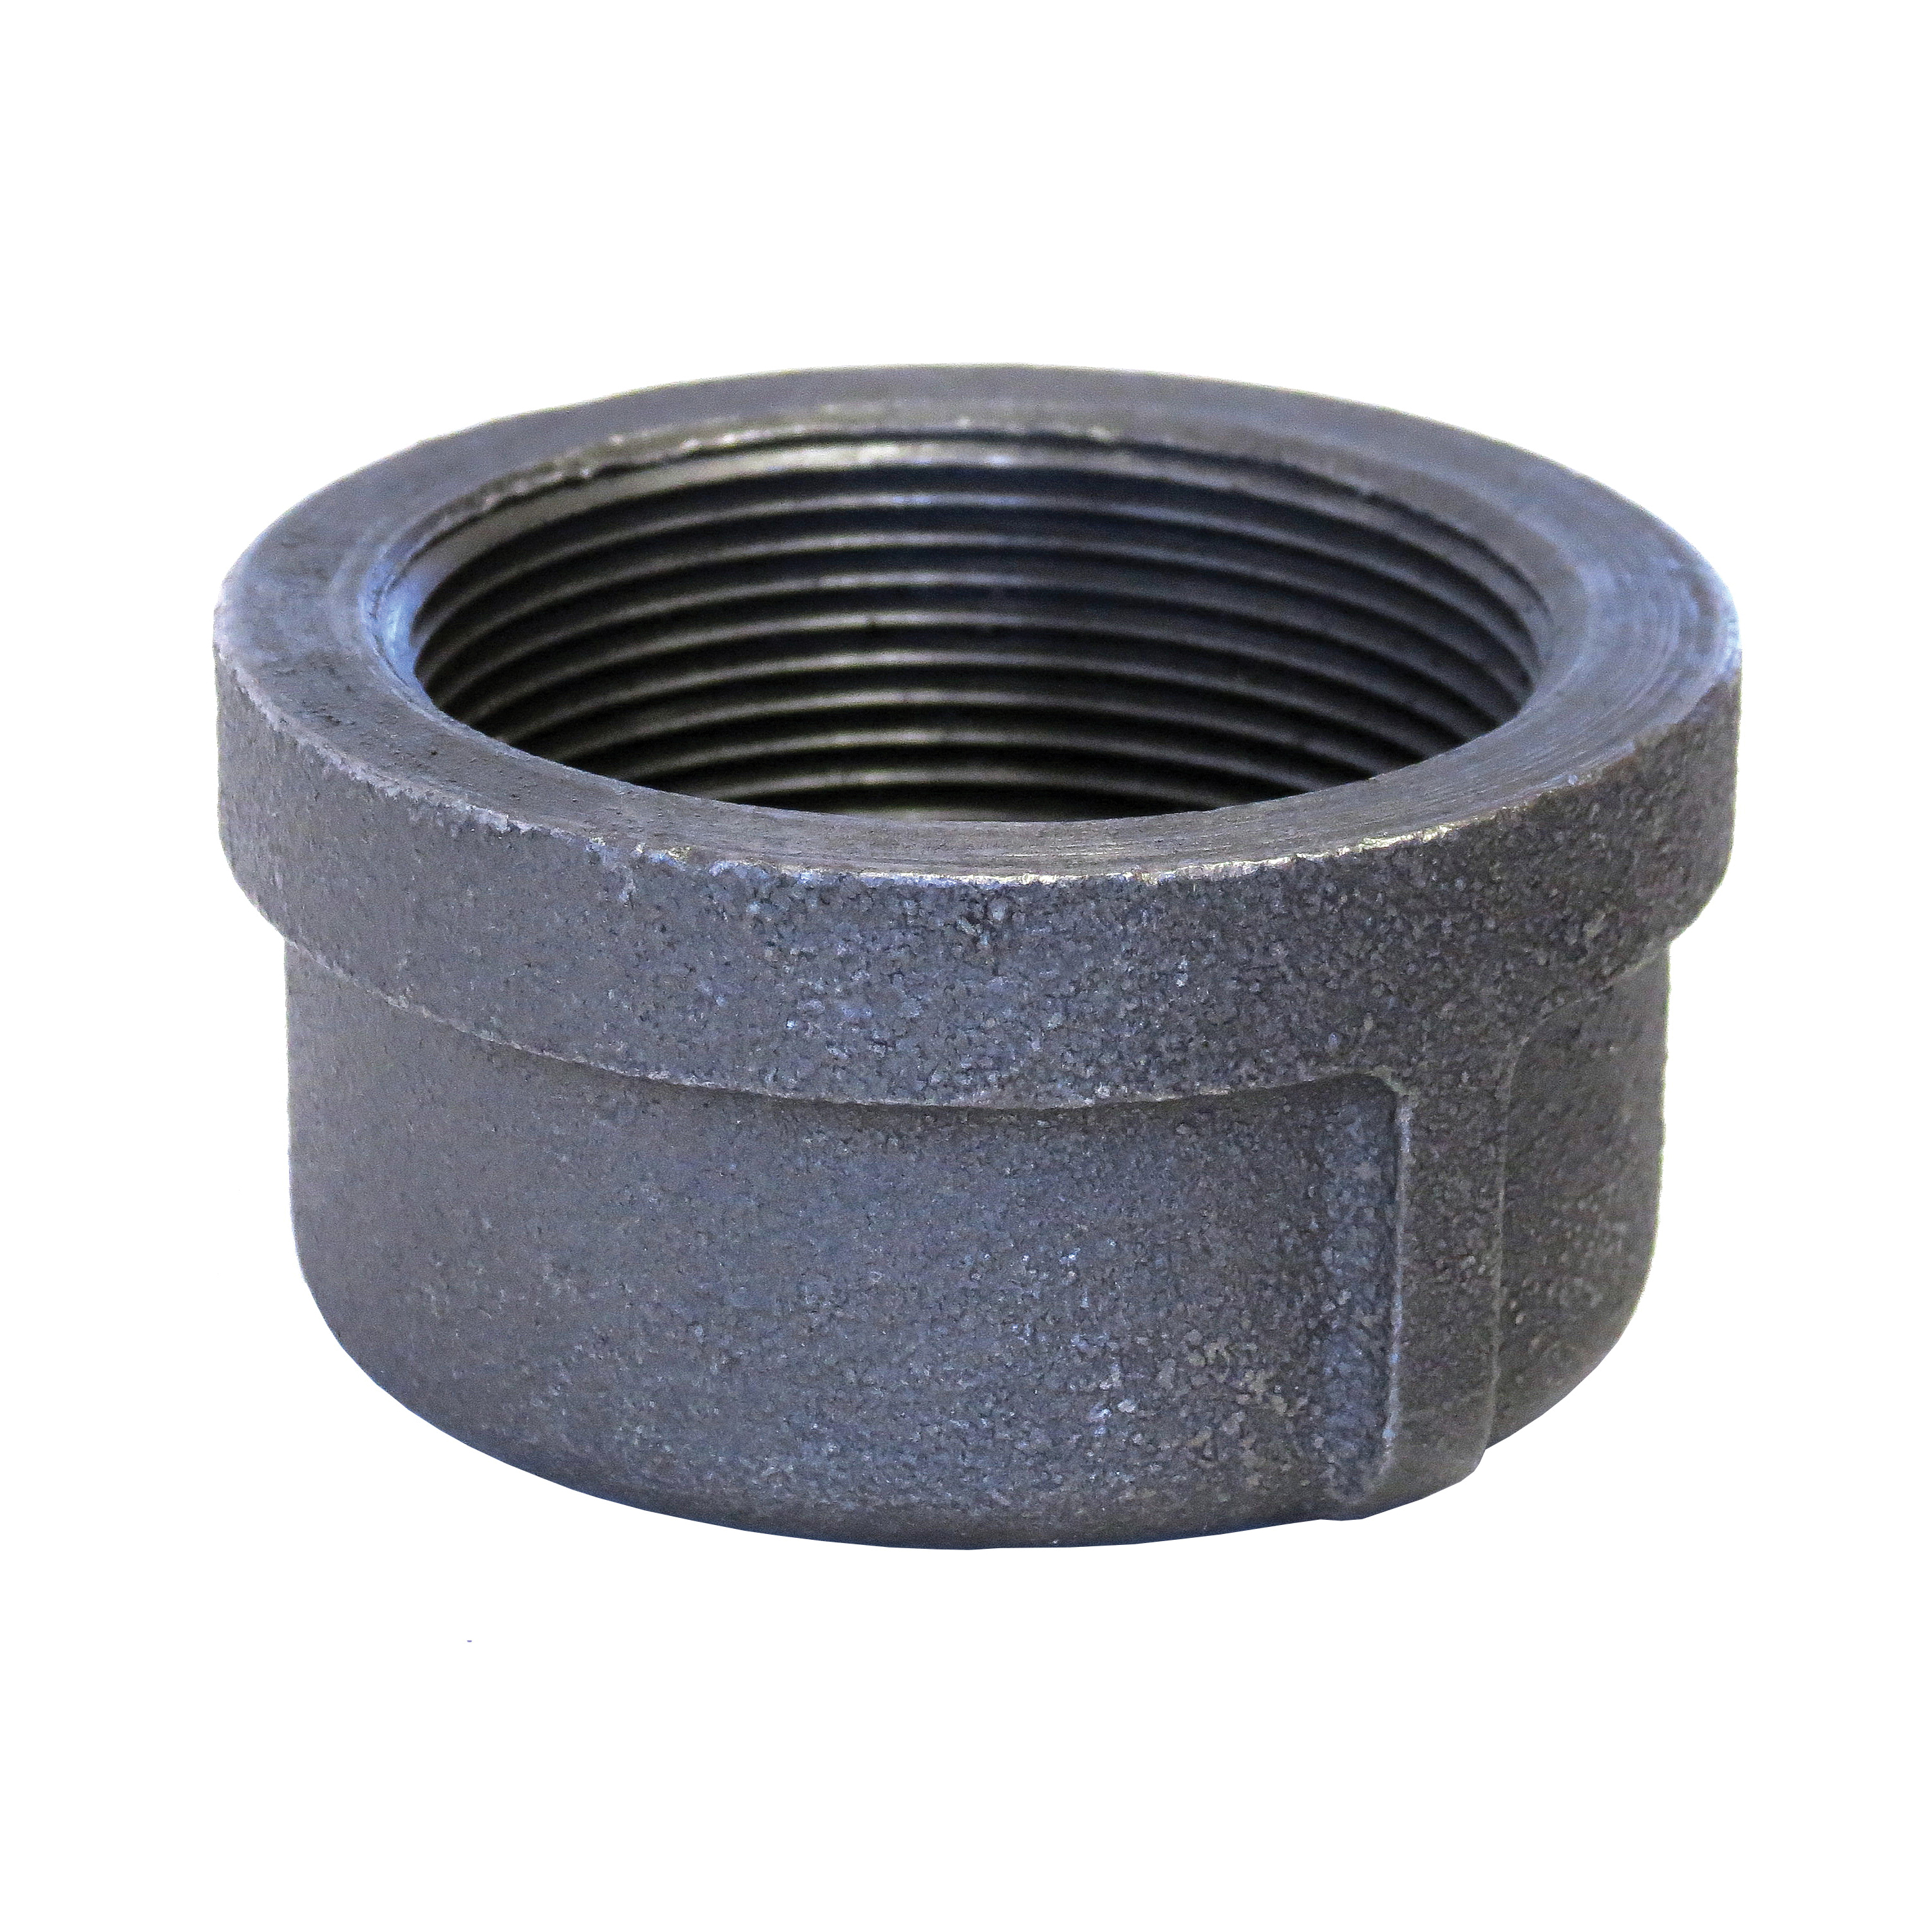 Anvil® 0318901006 FIG 1124 Standard Pipe Cap, 4 in Nominal, FNPT End Style, 150 lb, Malleable Iron, Black Oxide, Domestic